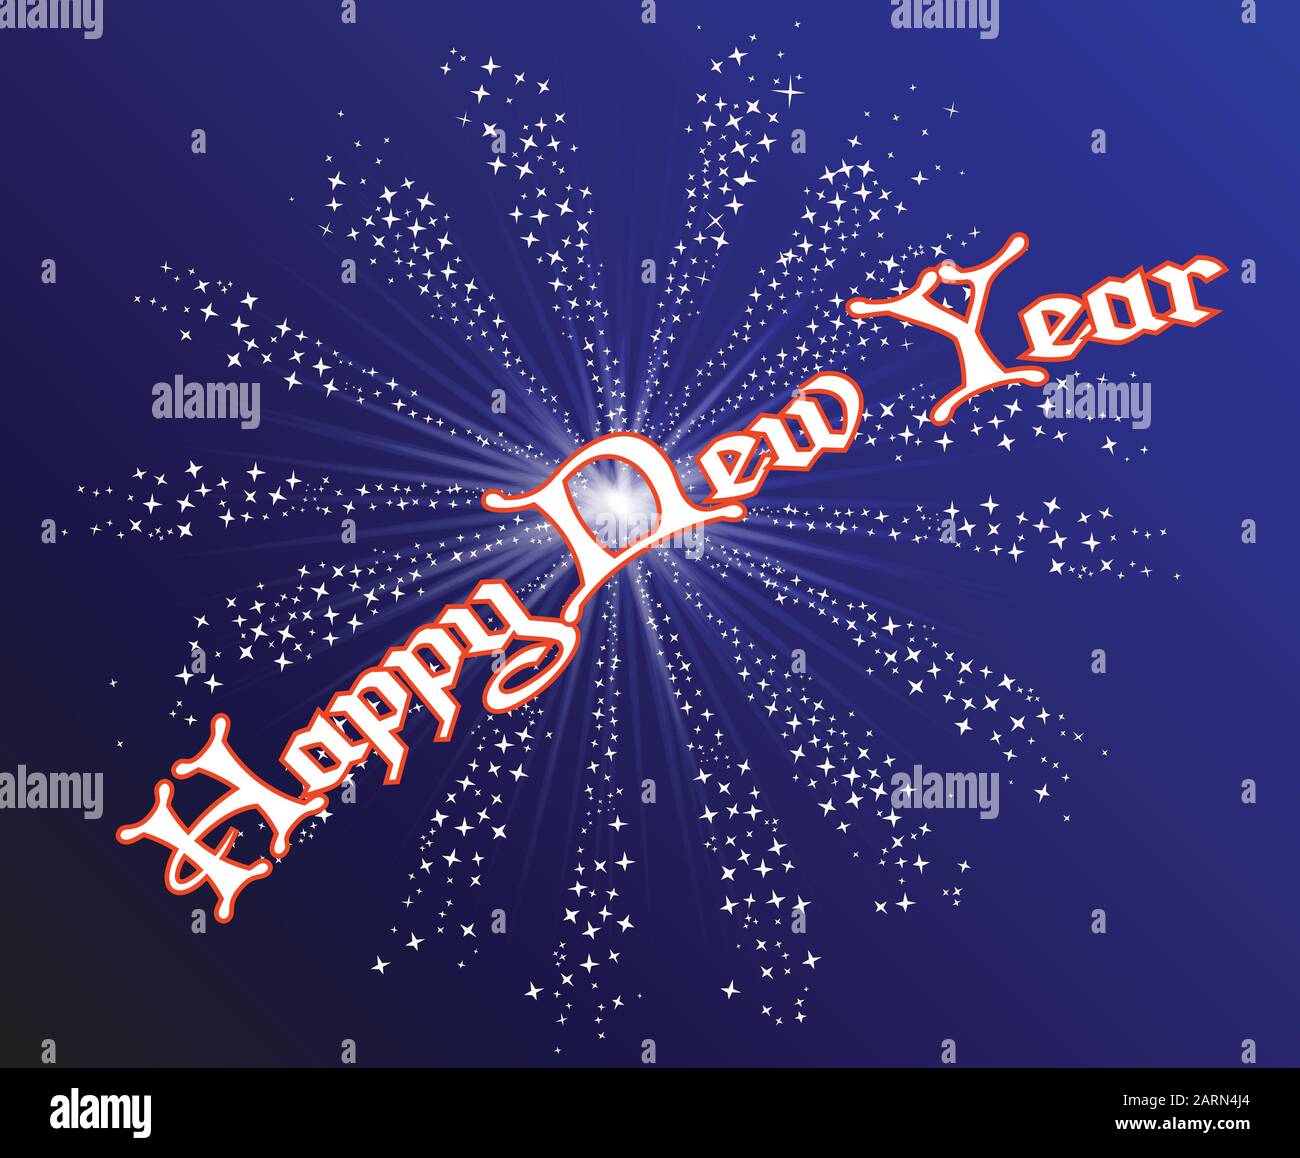 A celebration skyrocket explosion with fallout and the message Happy New Year Stock Vector